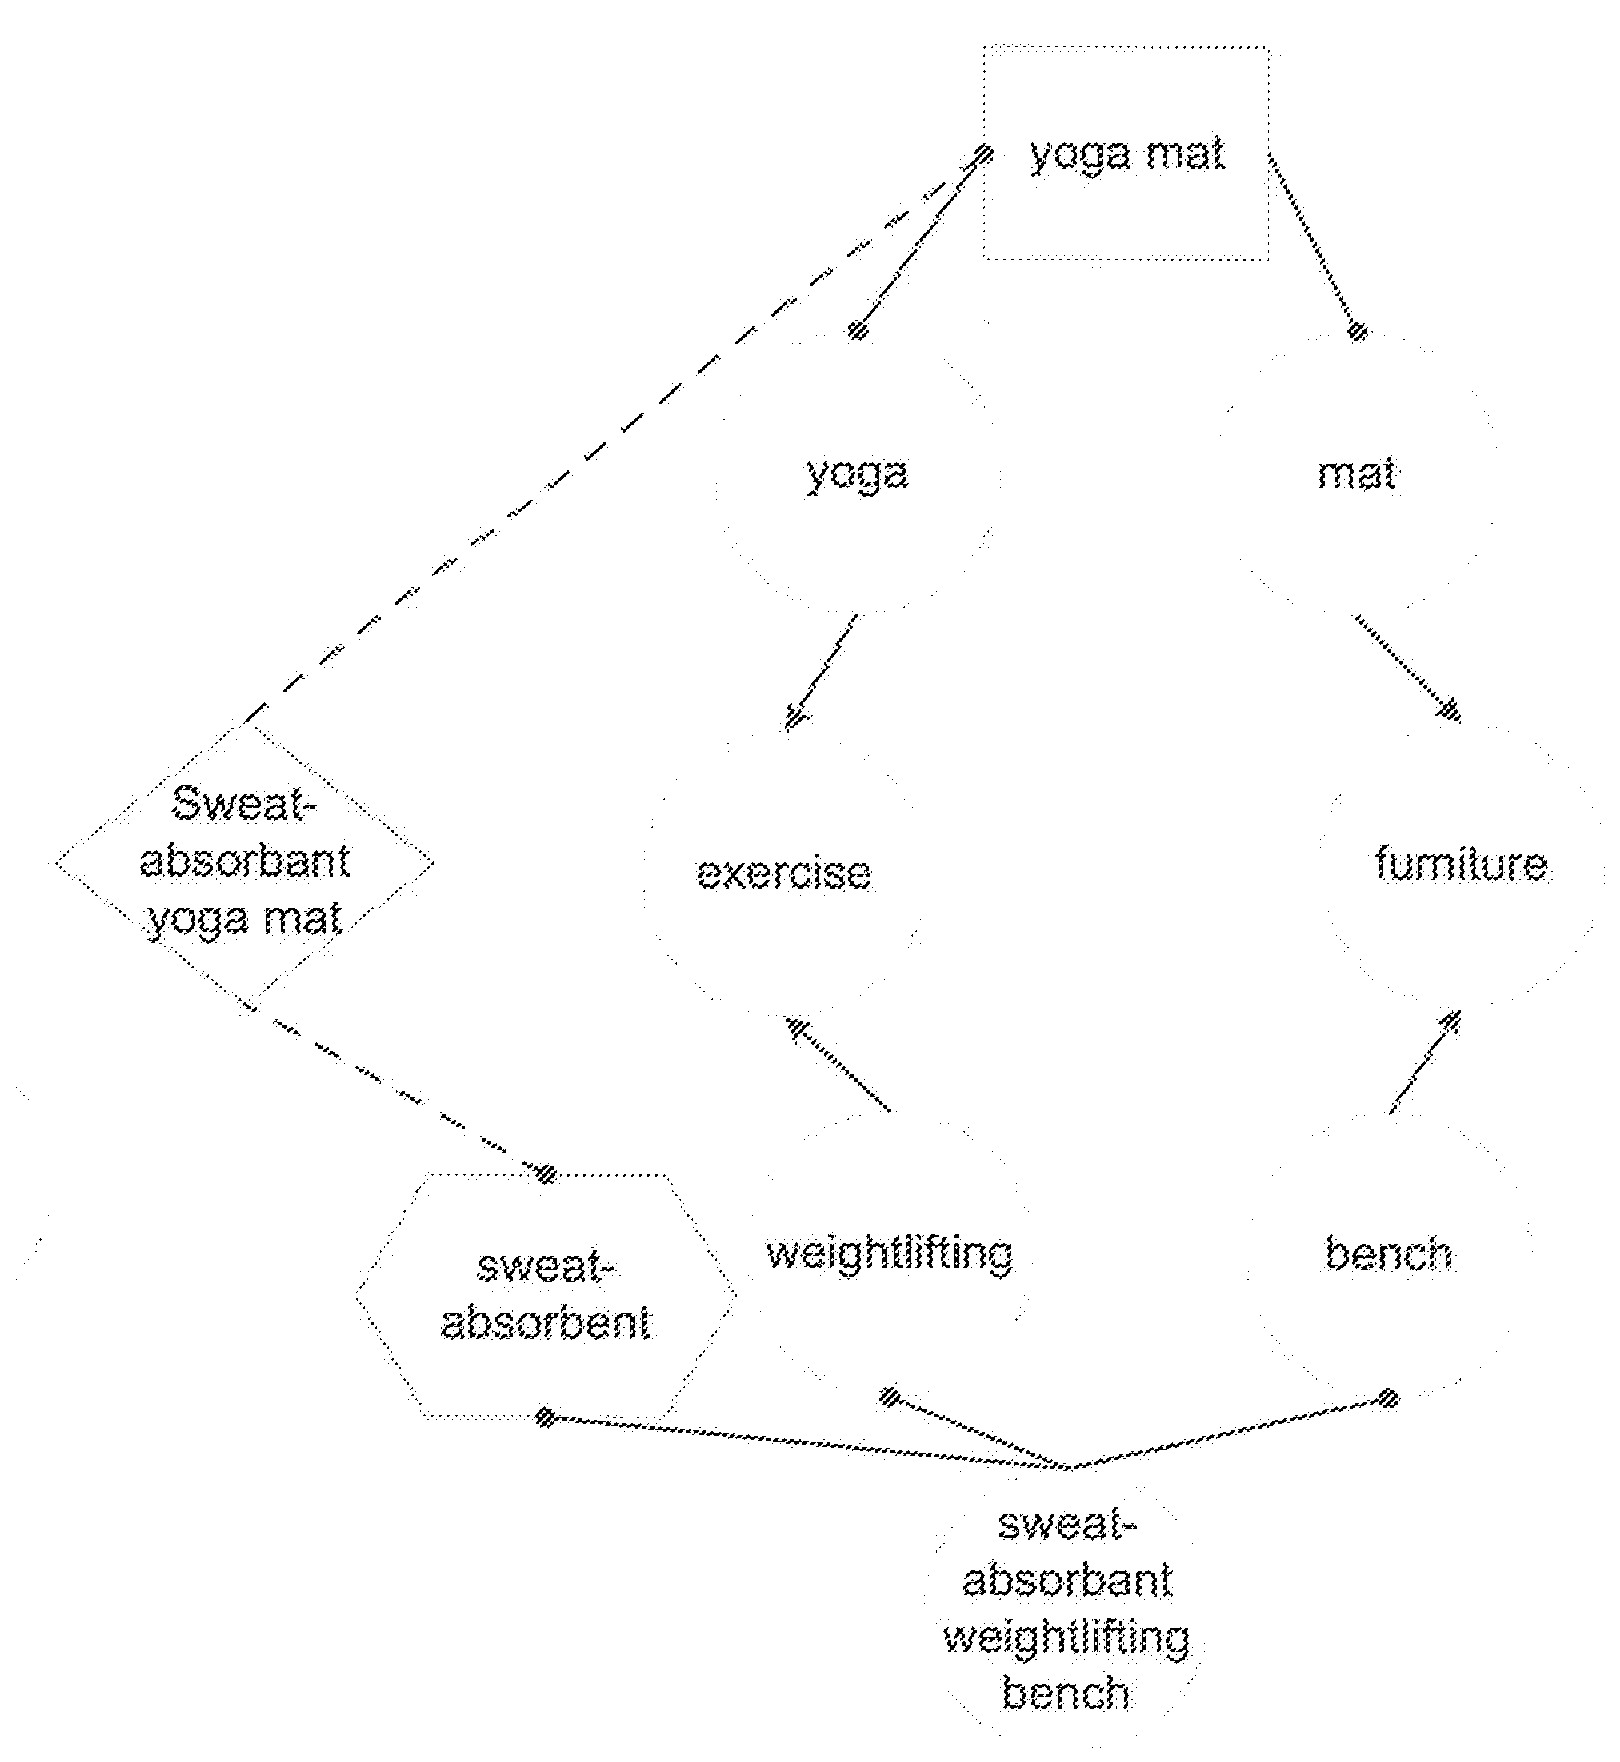 System and method for using a knowledge representation to provide information based on environmental inputs